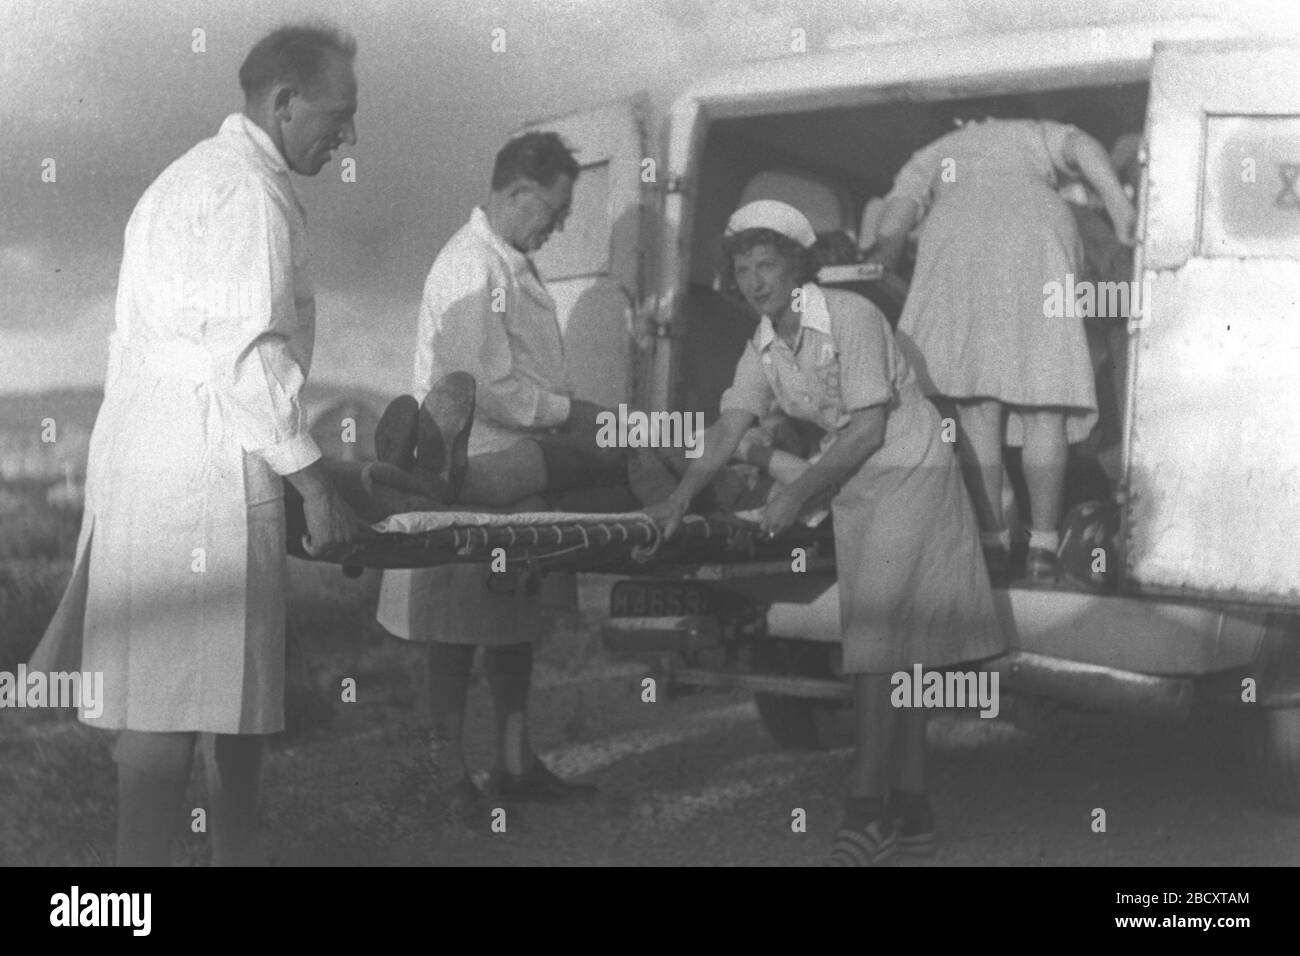 English A Sick Immigrant Being Transferred By Ambulance To The Reception Camp At Atlit I U I O I C U I E U E E U E I U U U O I I I U O U E U O 14 July 1944 This Is Available From National